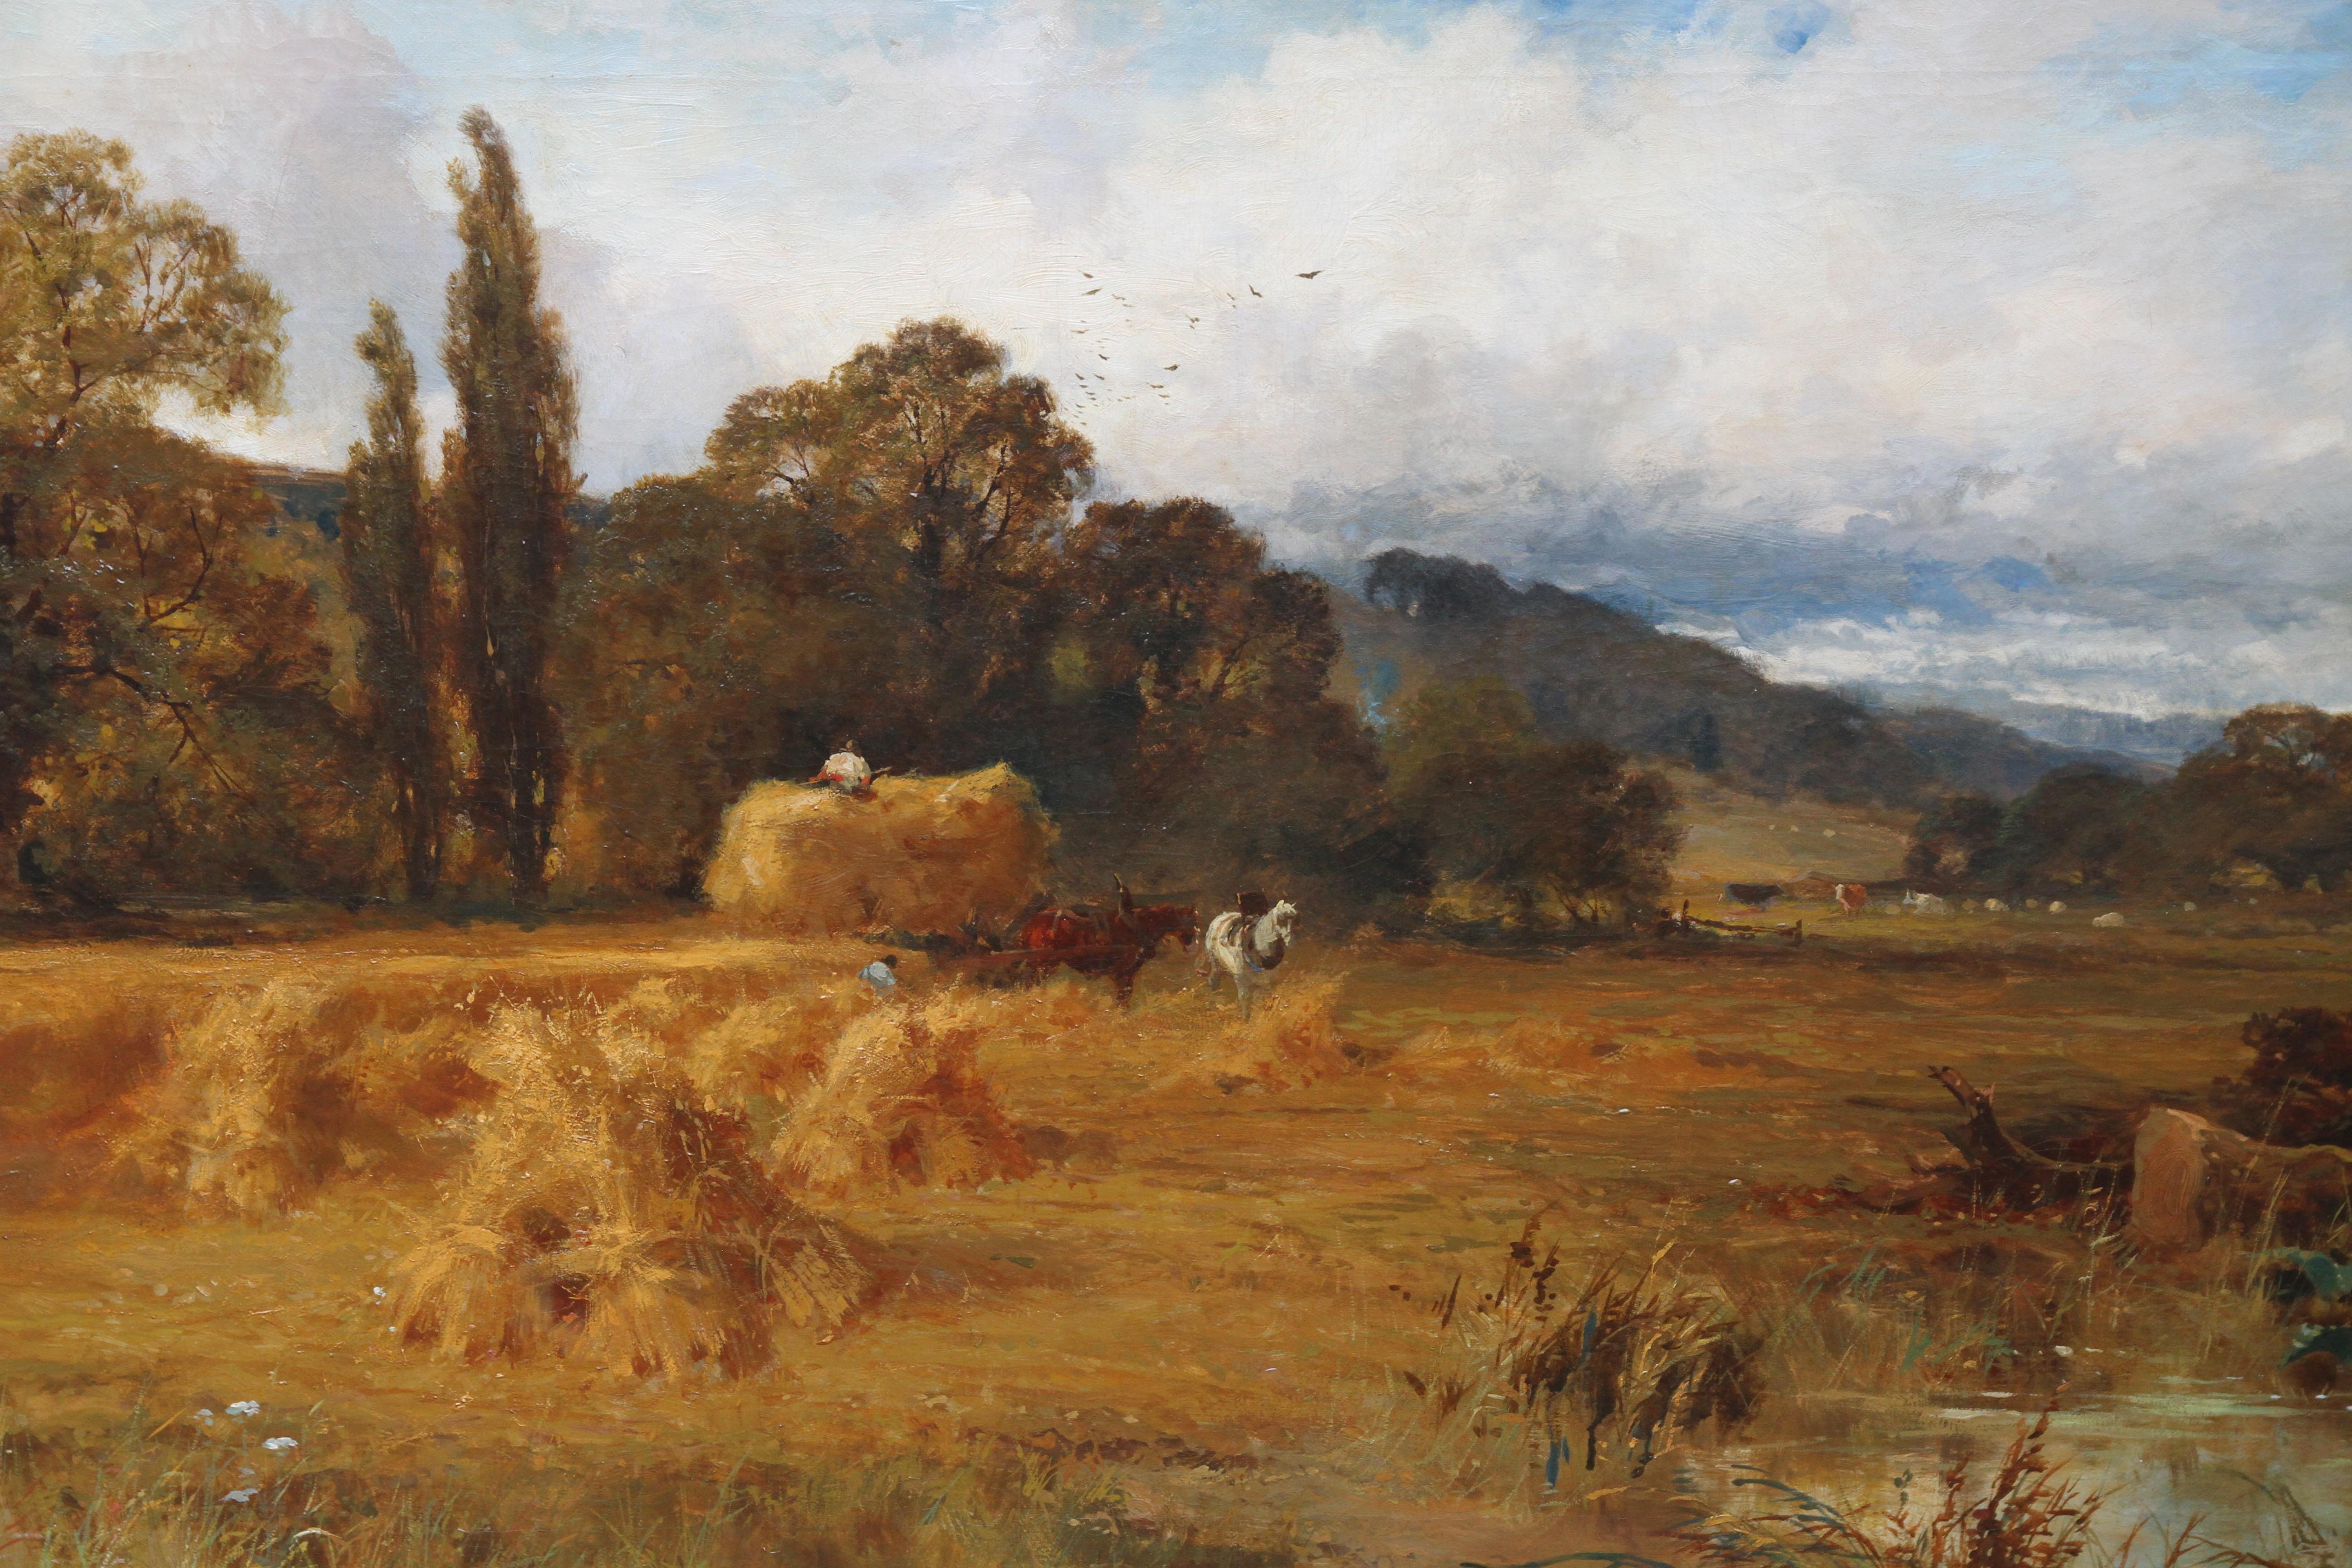 Harvest Time in Yorkshire - British art 19th century landscape oil painting For Sale 5